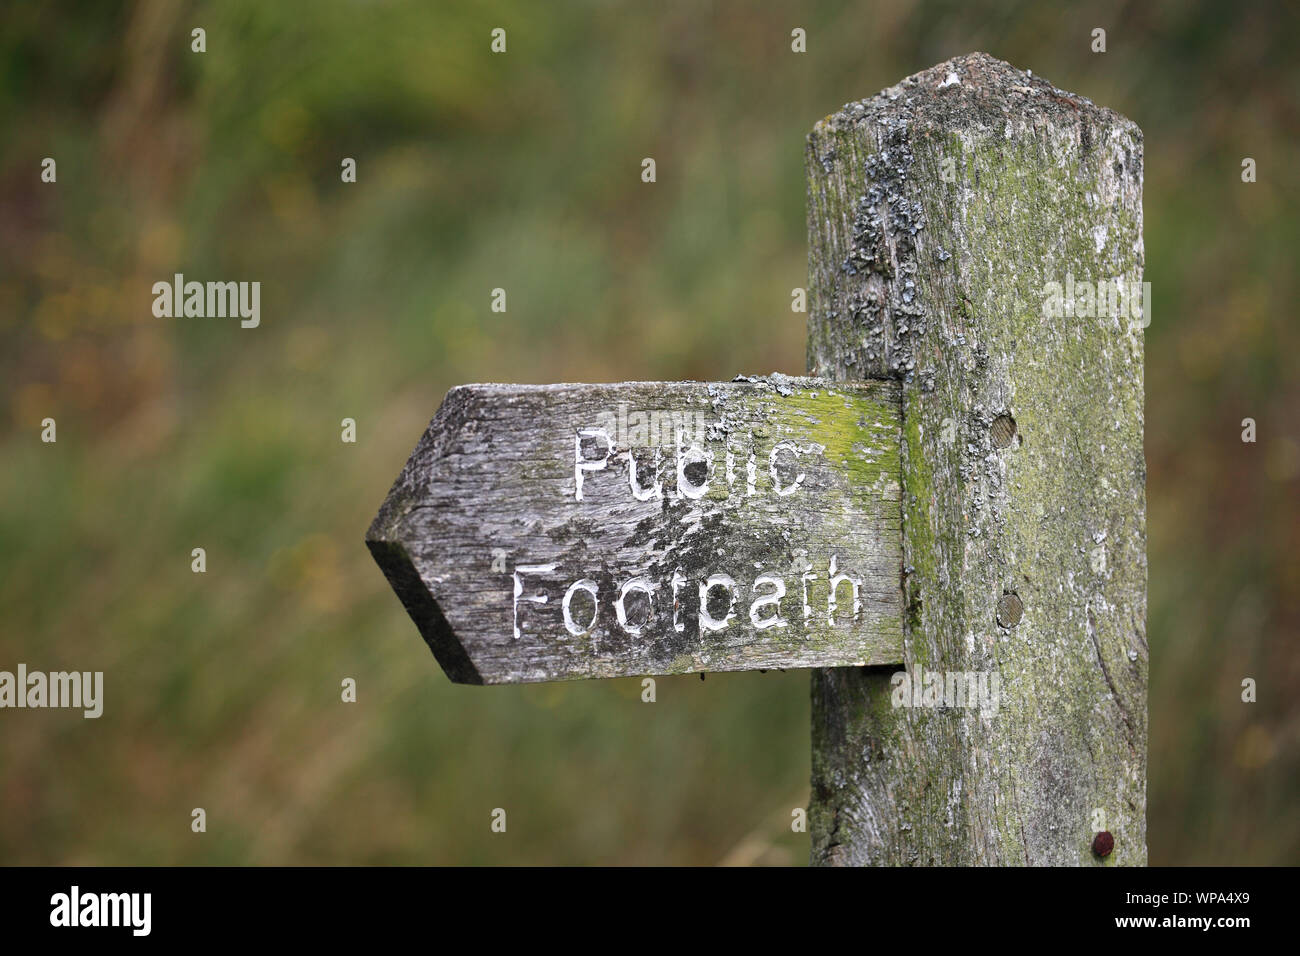 Wooden Public Footpath sign. Stock Photo